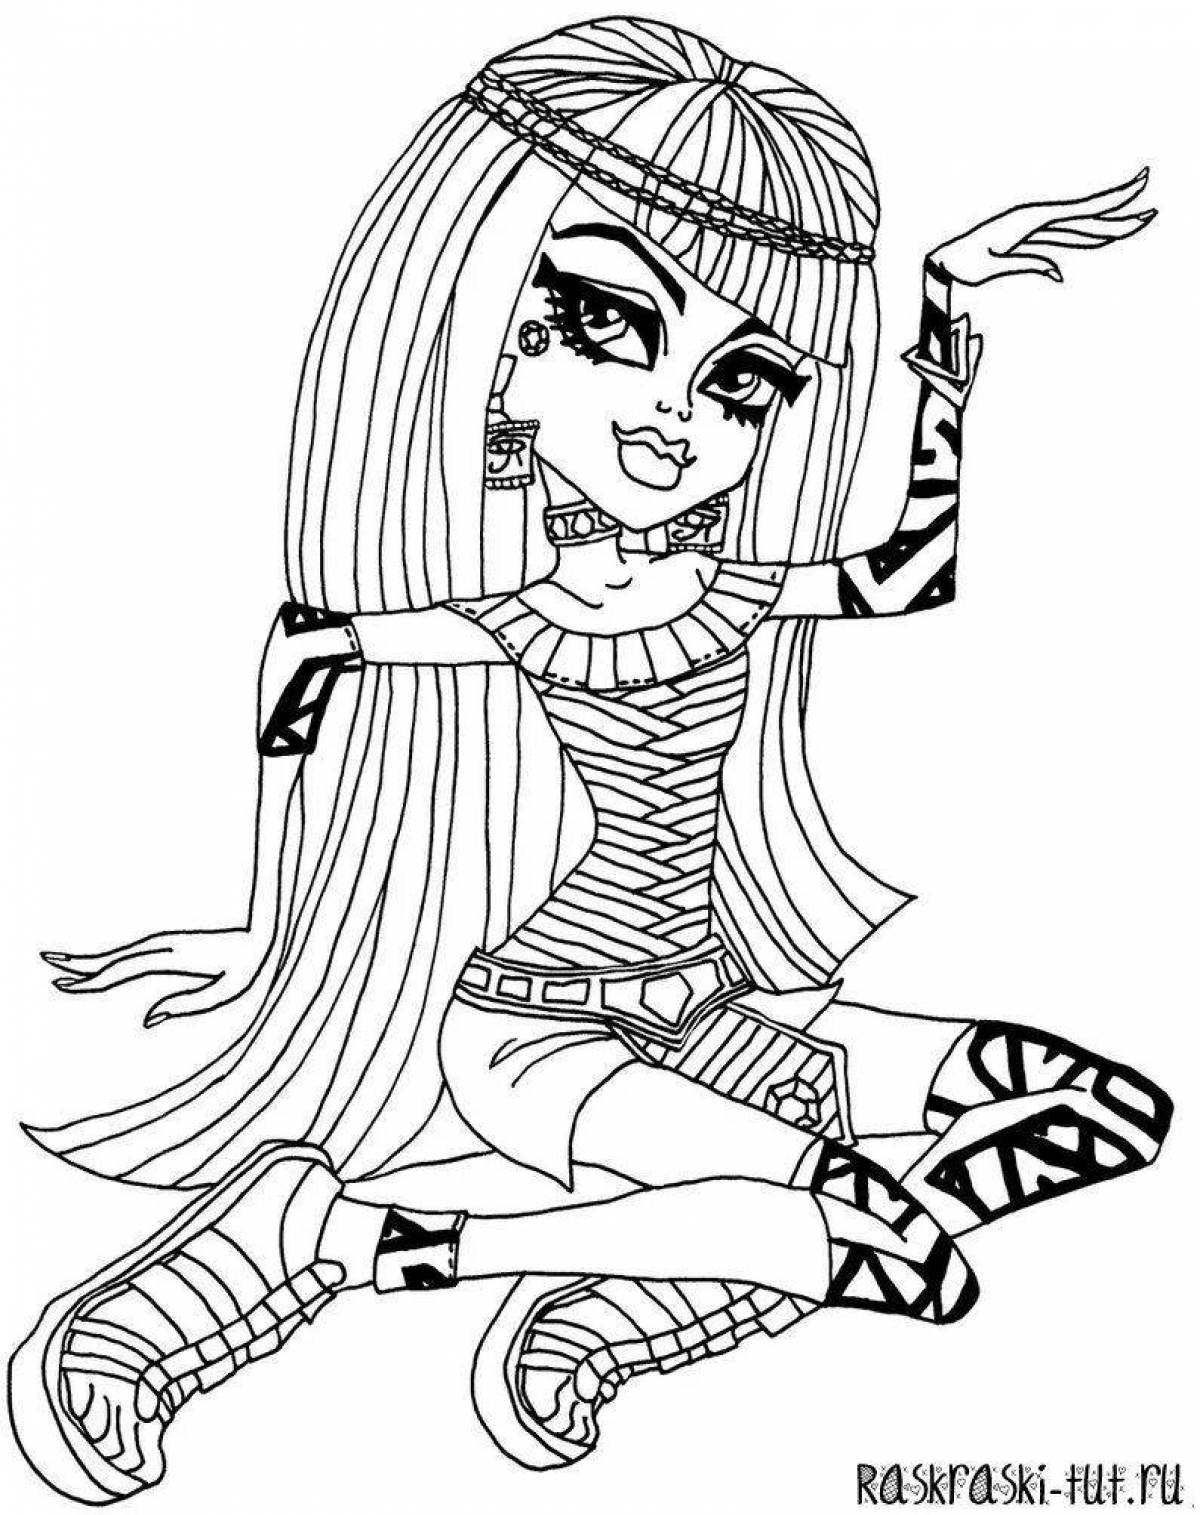 Terrific monster high coloring book for girls